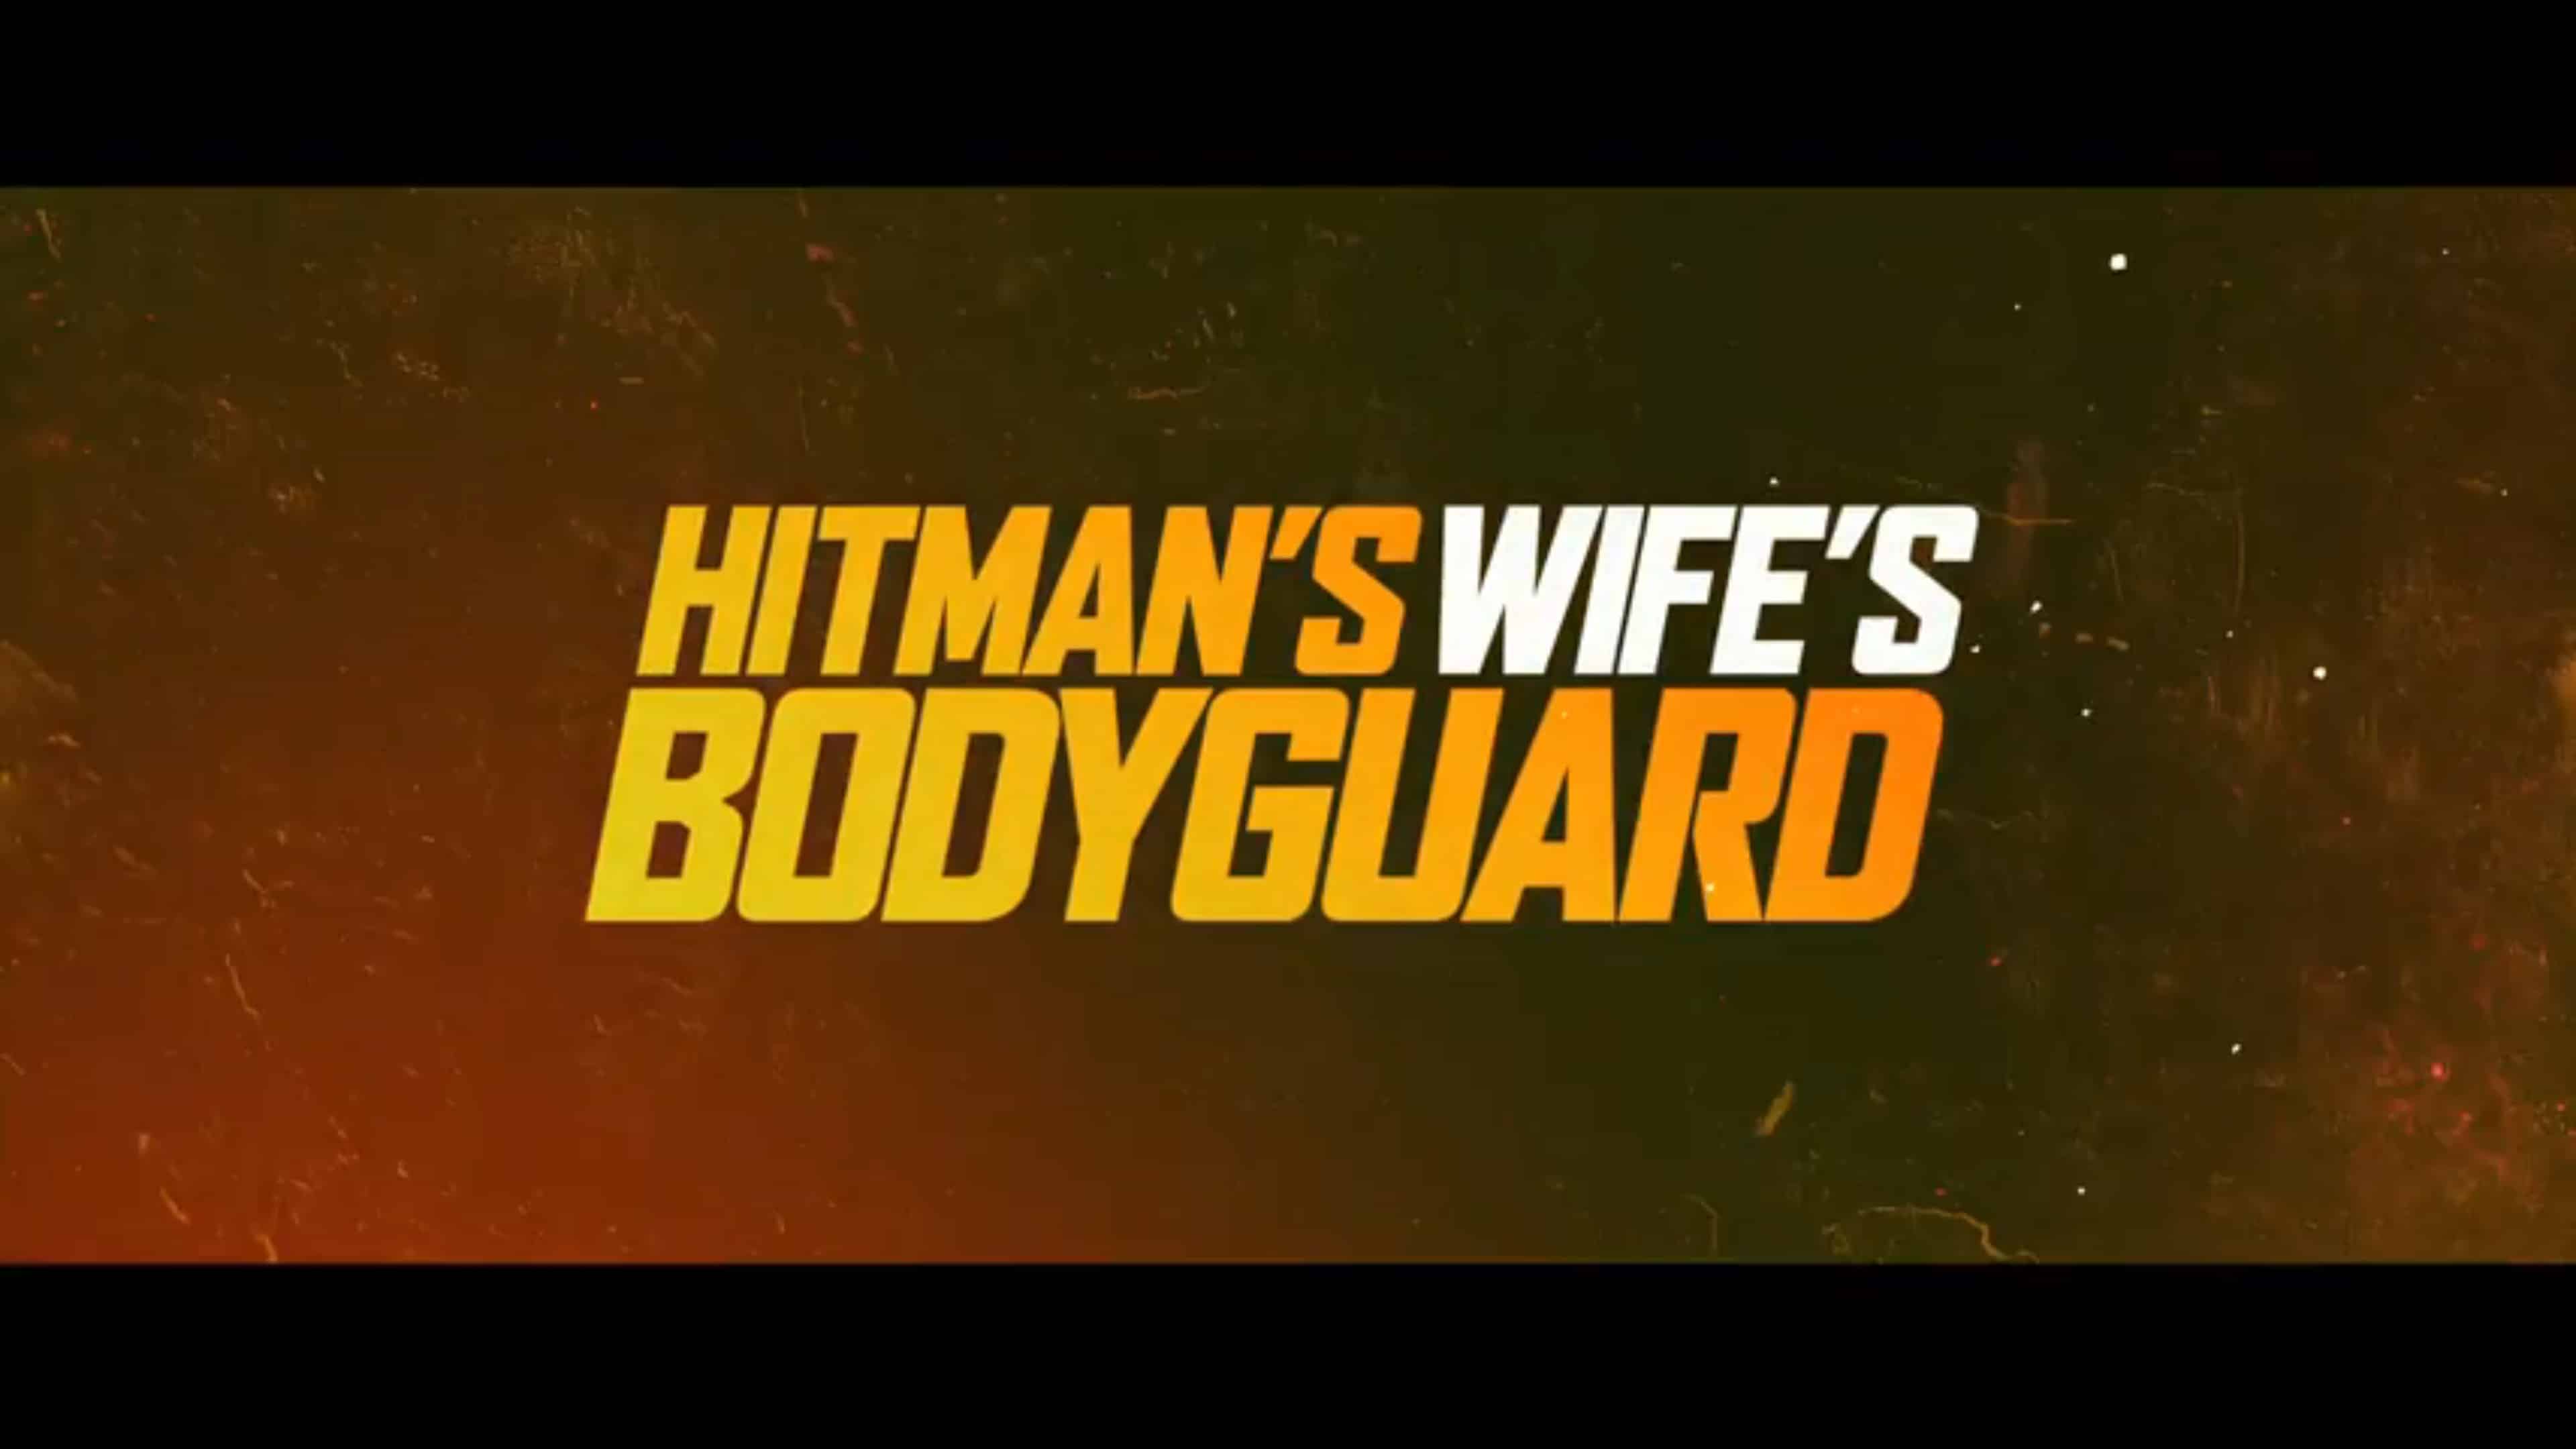 The Hitman’s Wife’s Bodyguard (2021) – Review/Summary (with Spoilers)